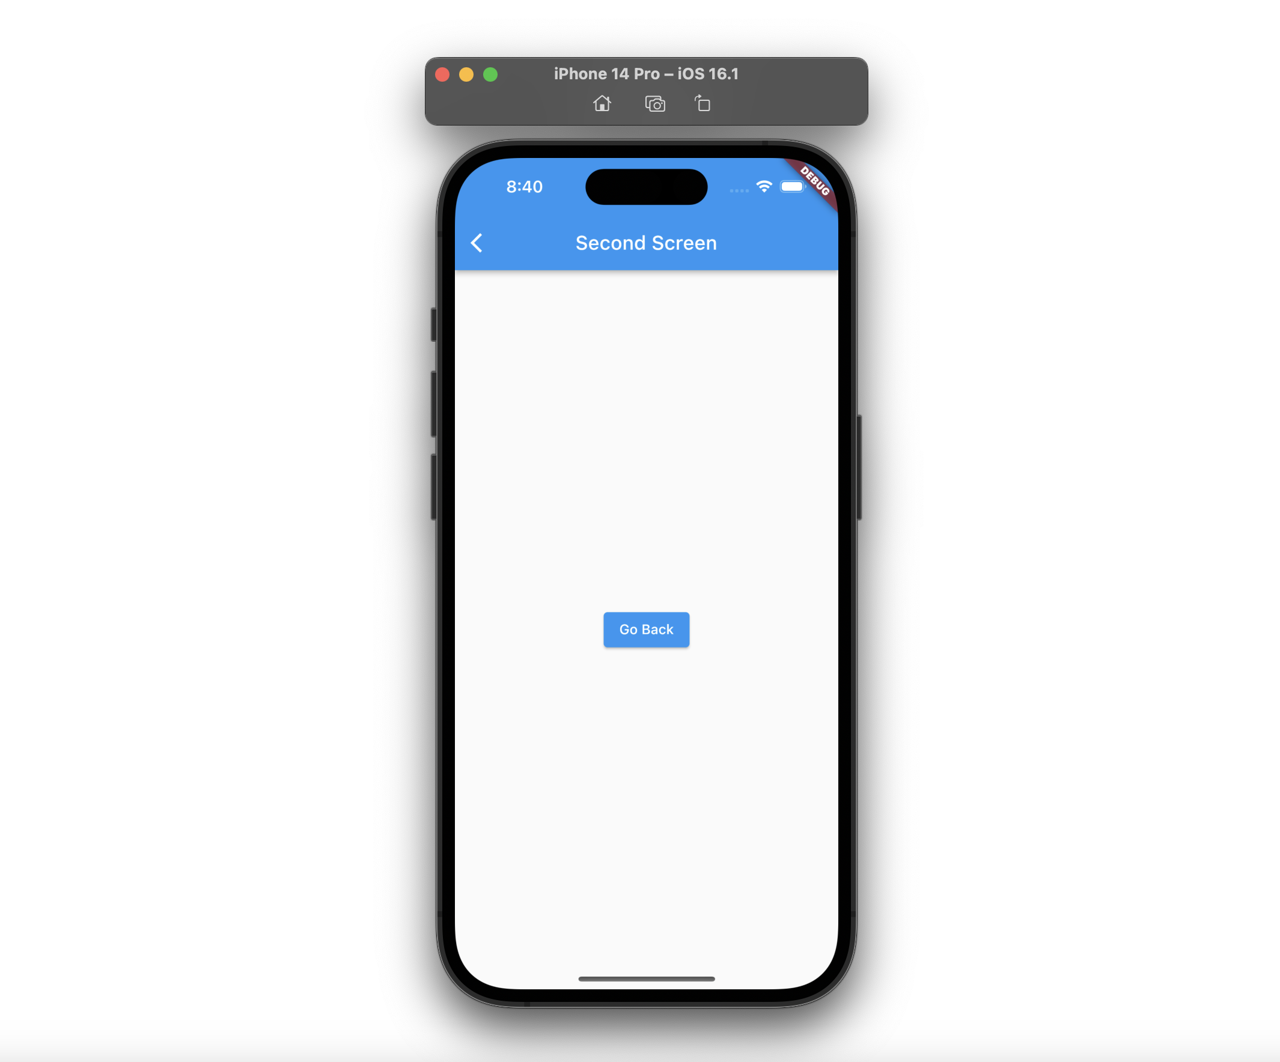 Flutter automaticallyImplyLeading - back button